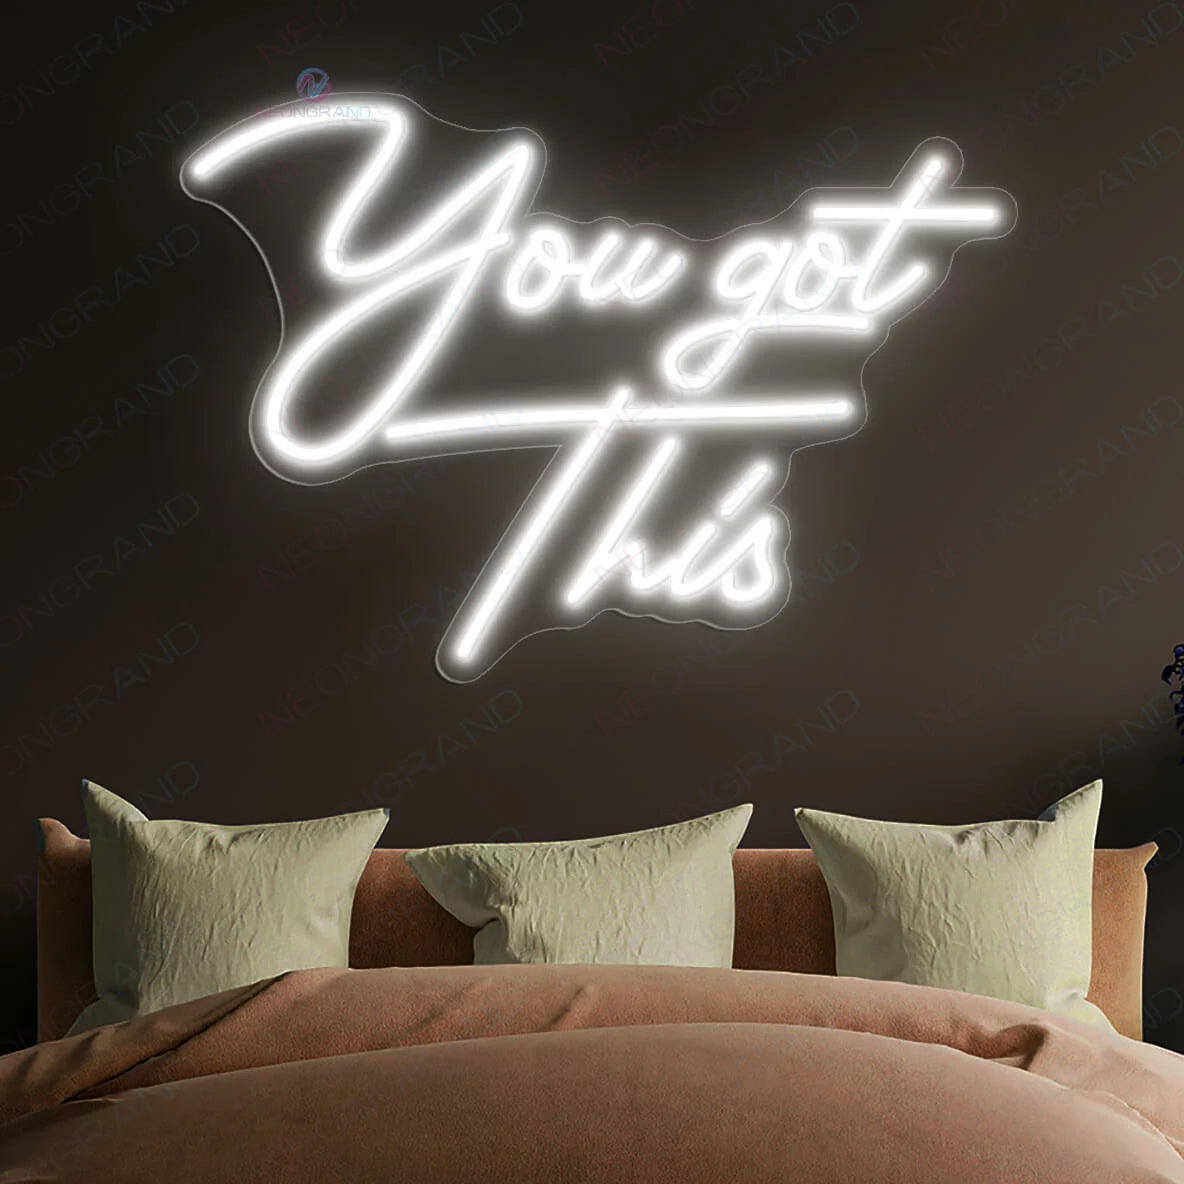 You Got This Neon Sign Inspiration Led Light white